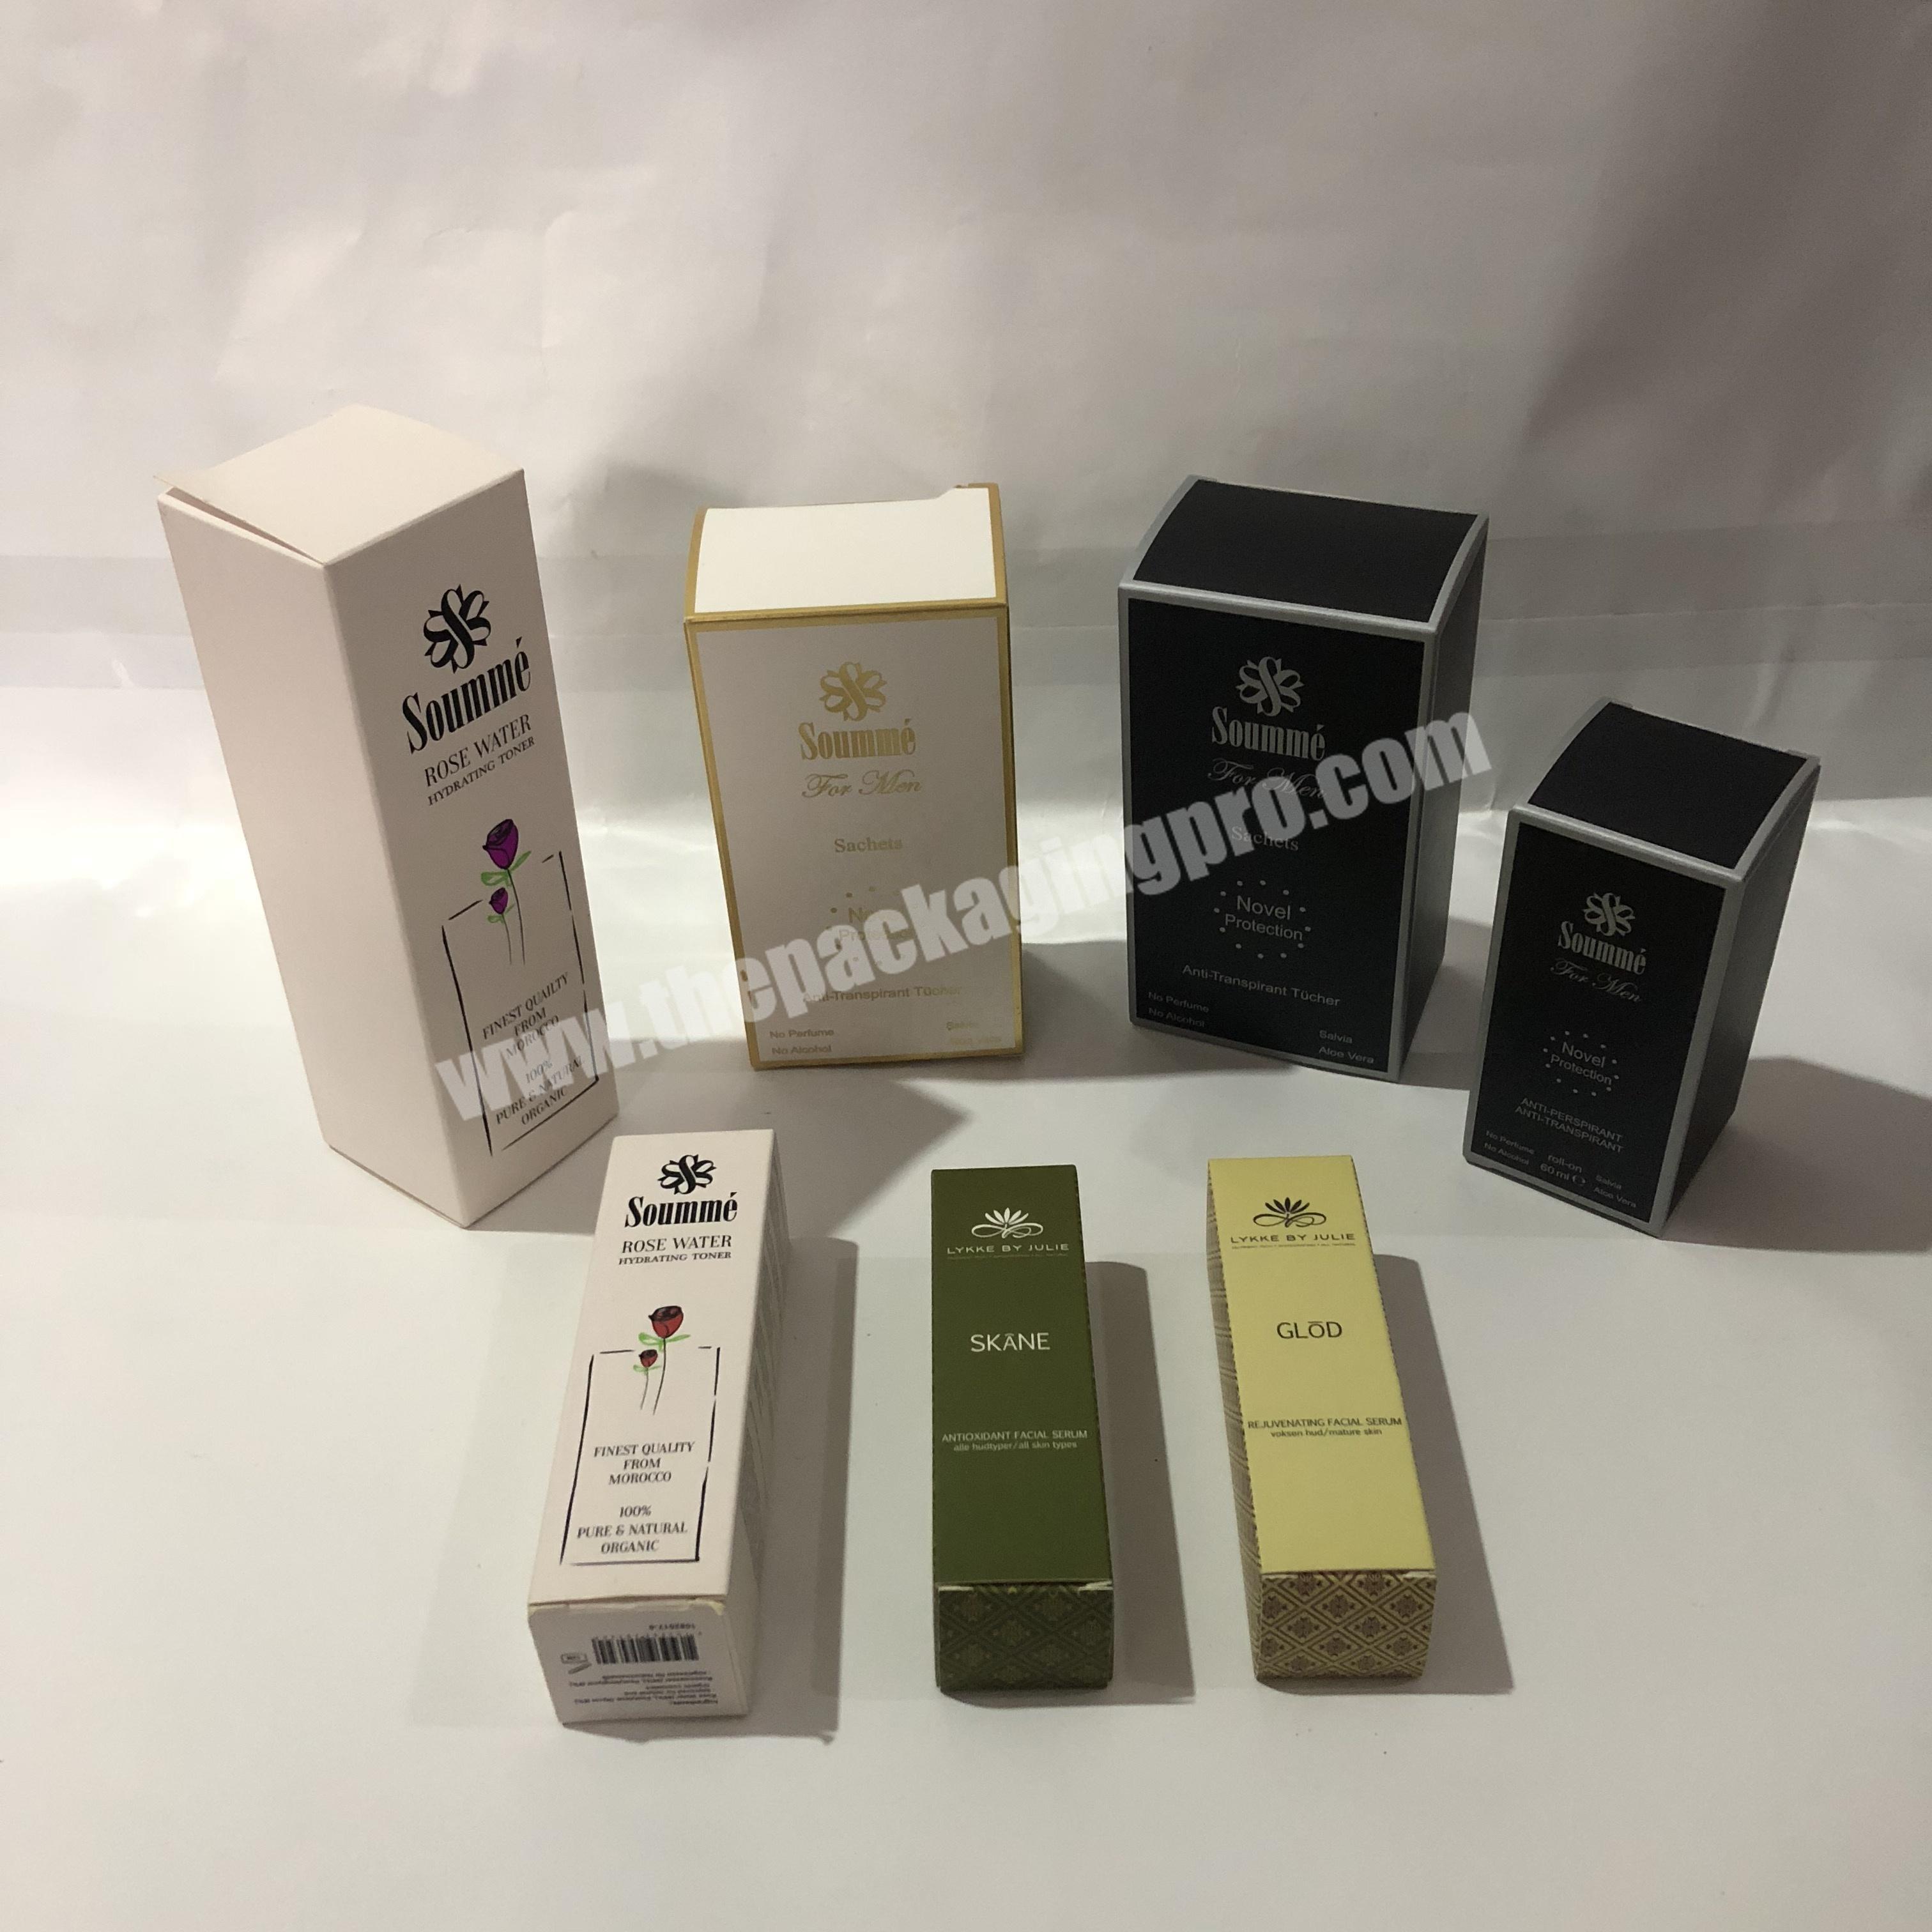 Gold design perfume lipstick packing boxes